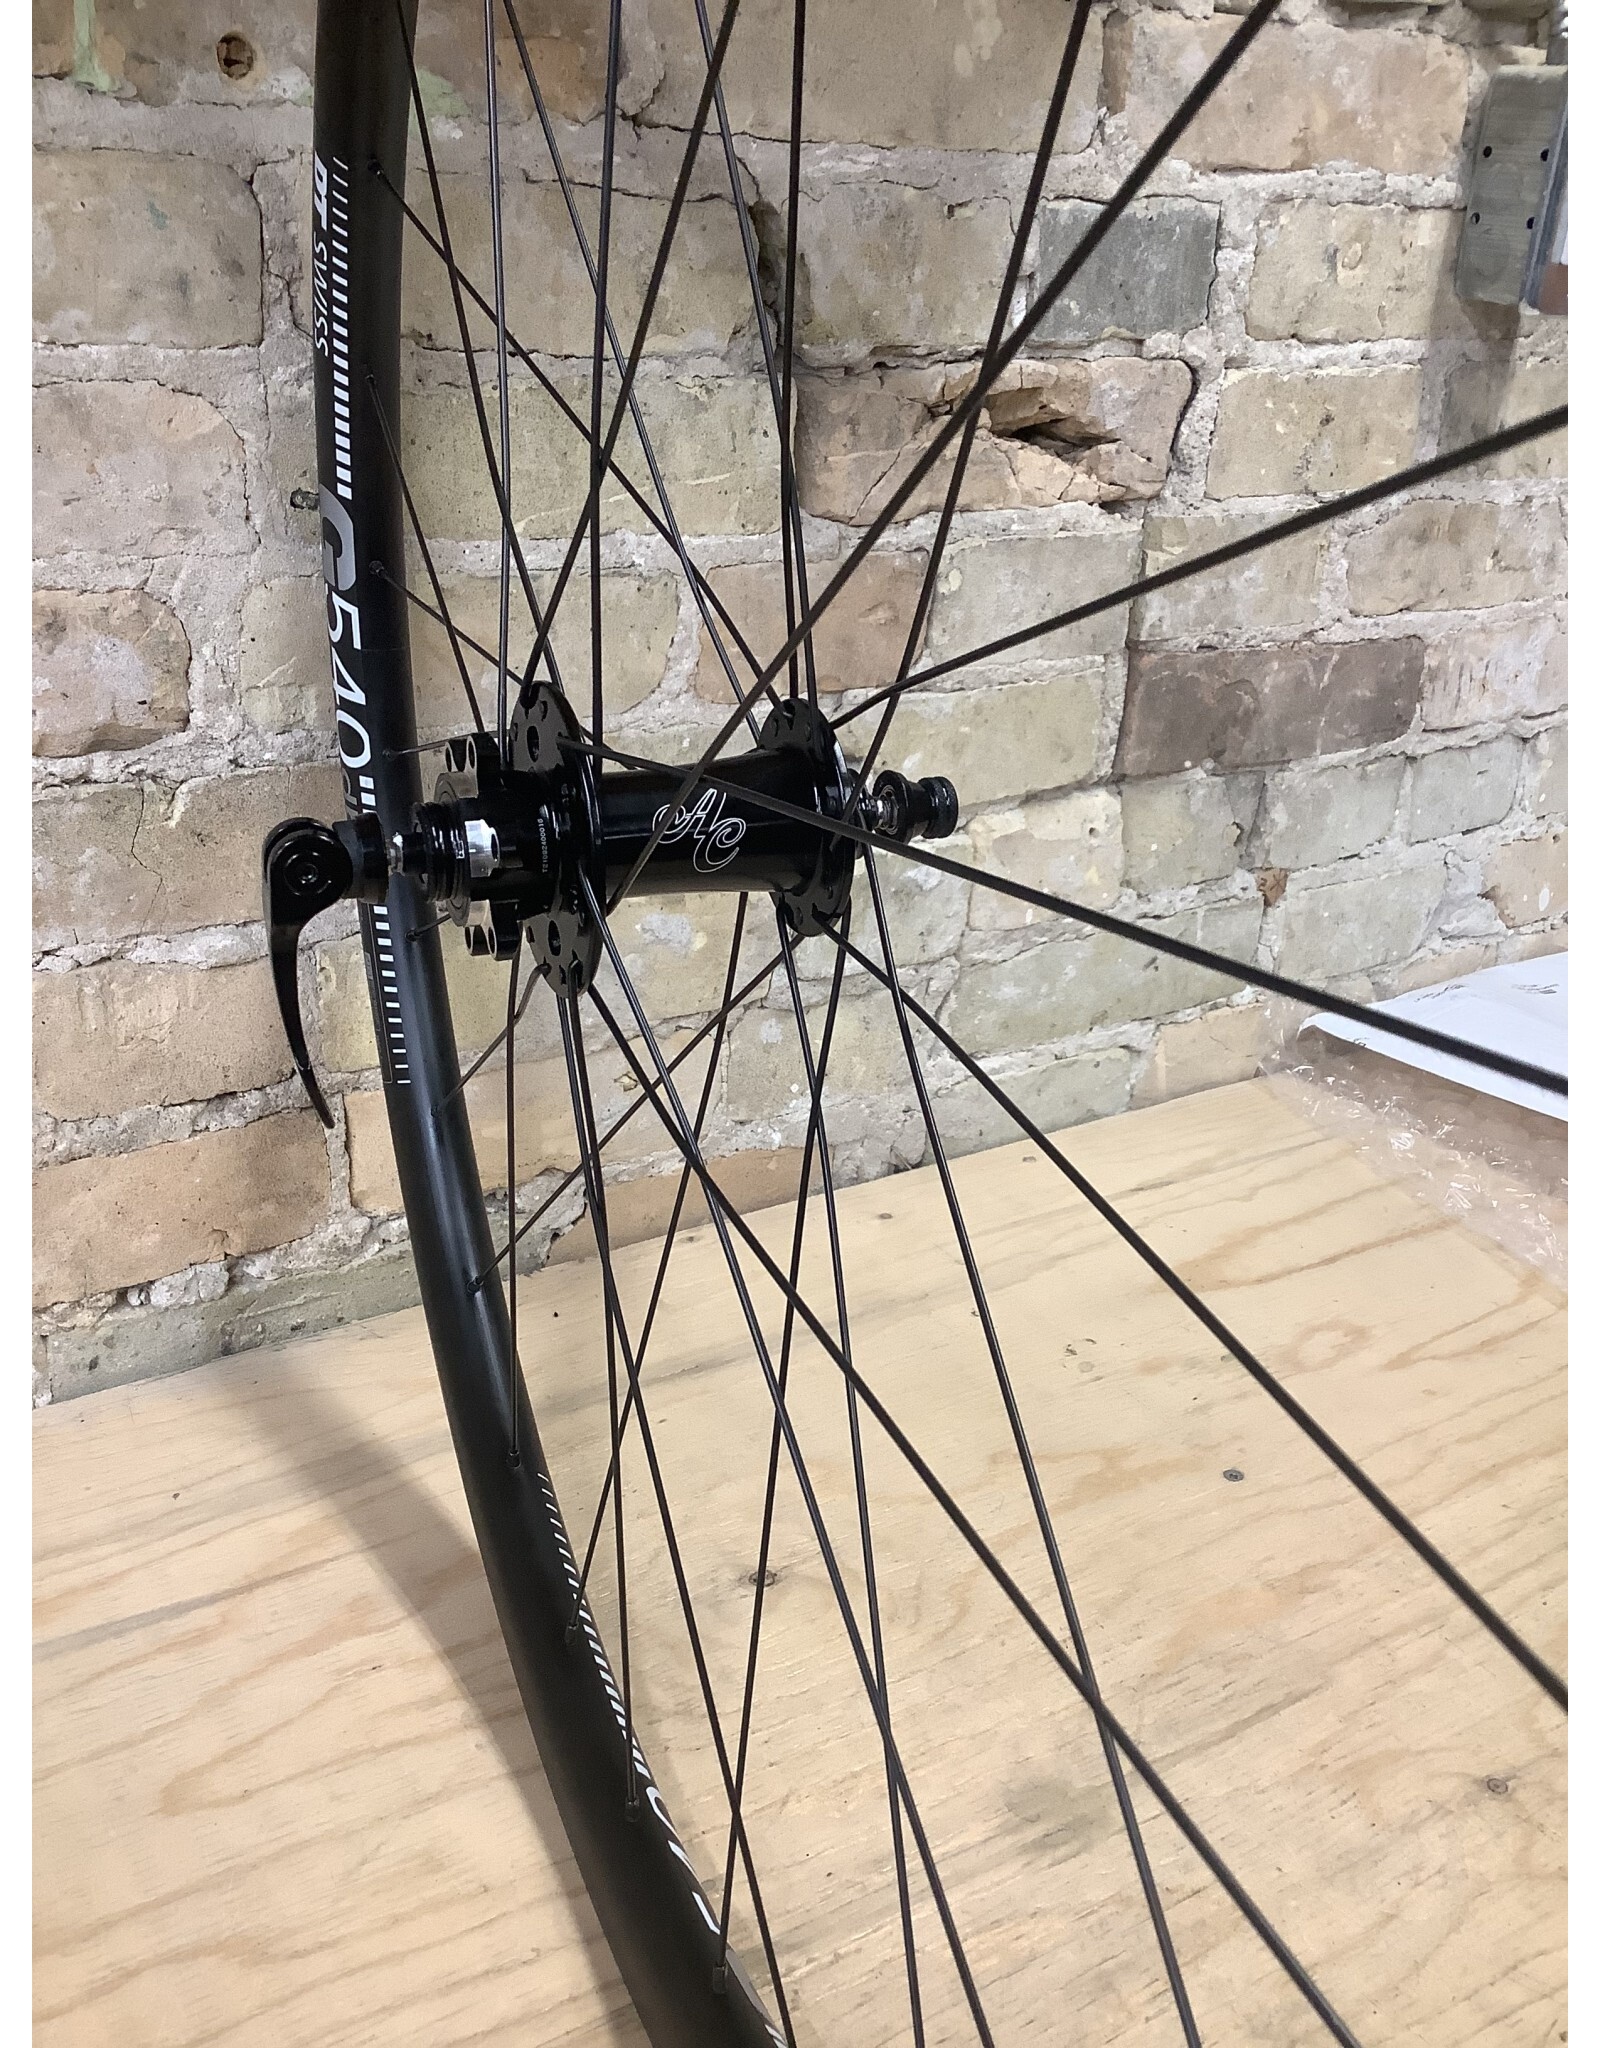 Natural Cycleworks Handbuilt Wheel 700c - DT Swiss G540 - All City Go Devil Front - Doubled Butted Spokes Black